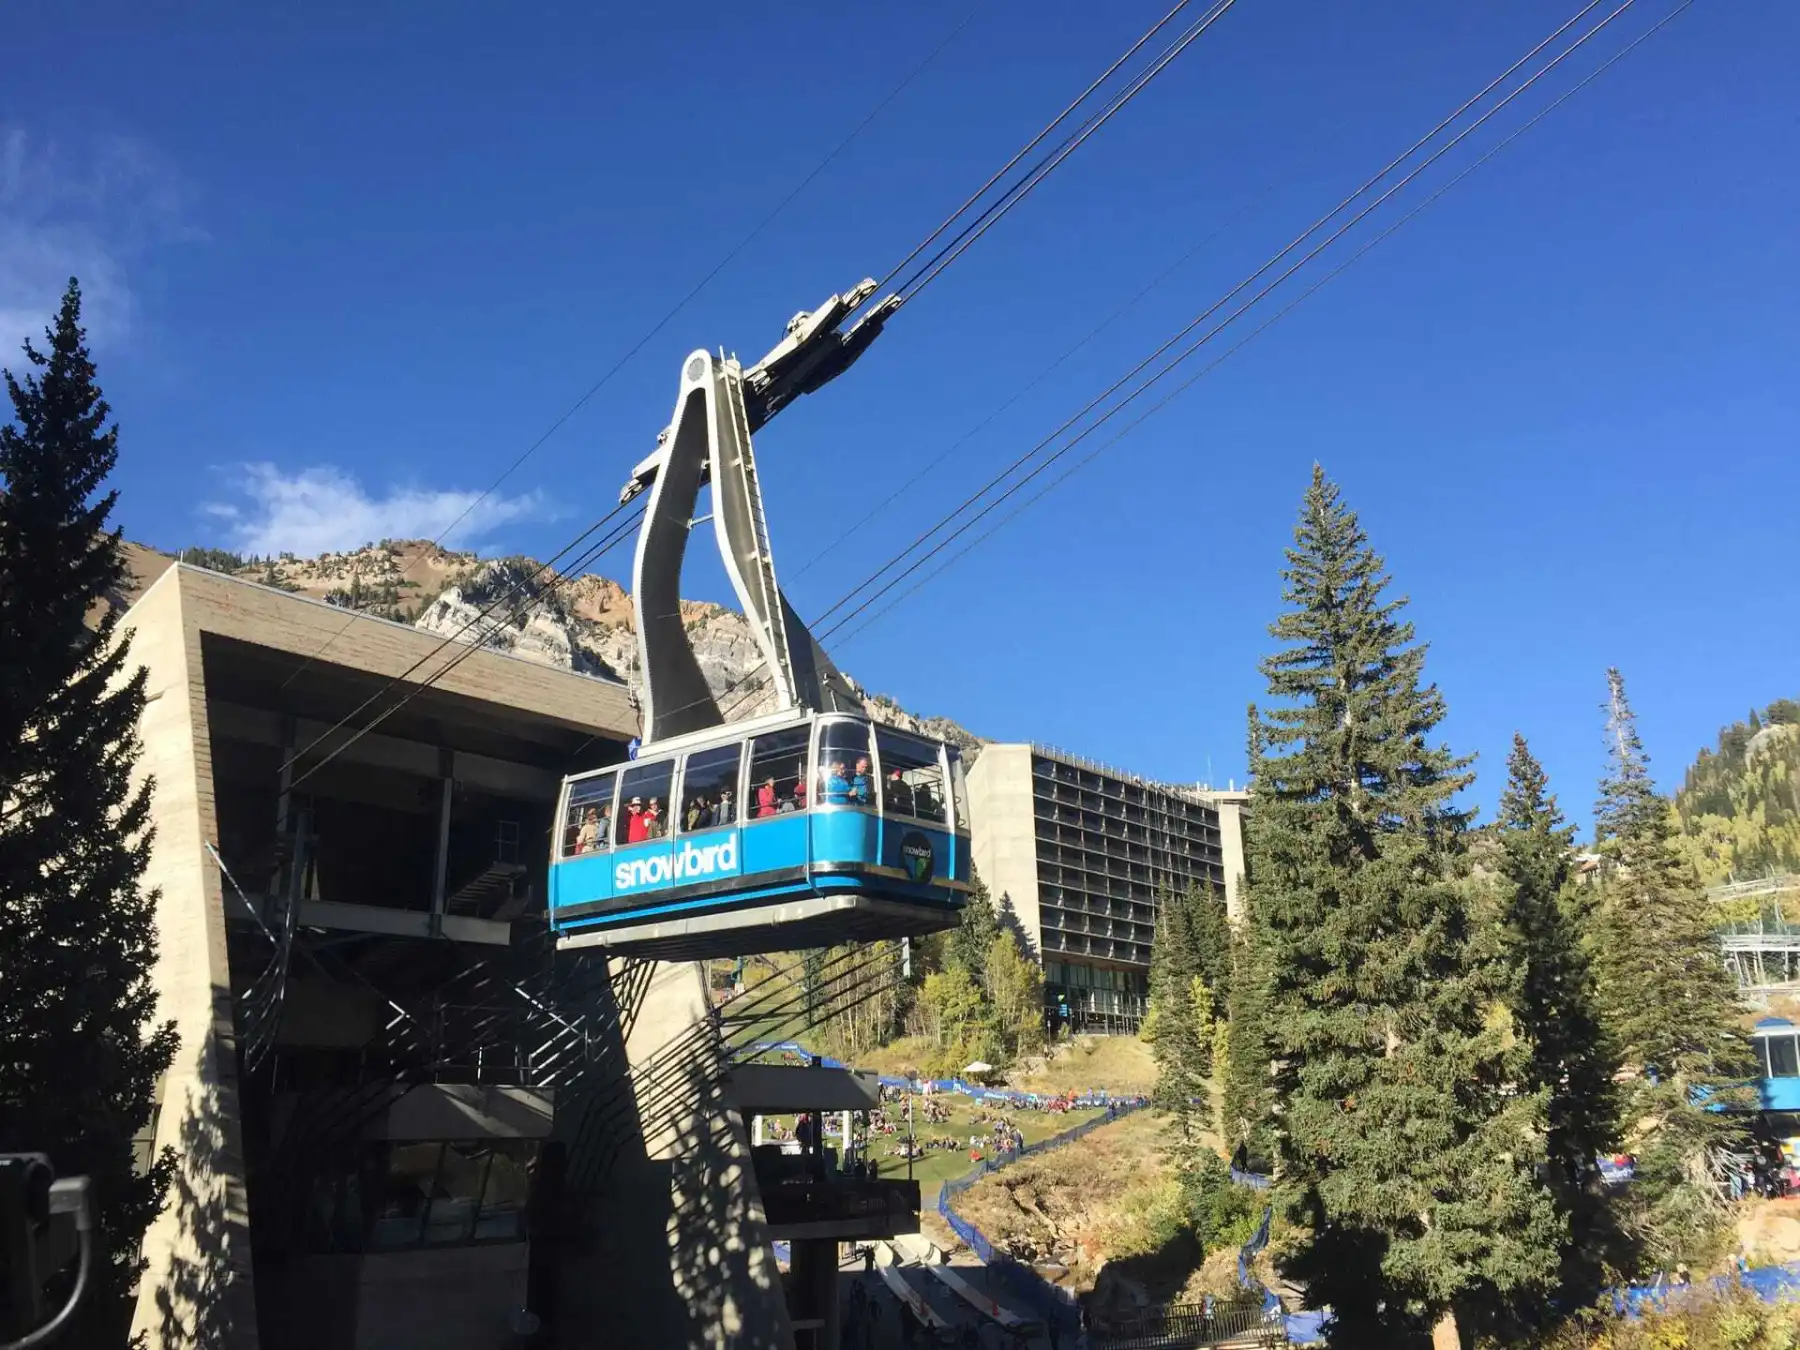 The Snowbird tram pulling out of the base area